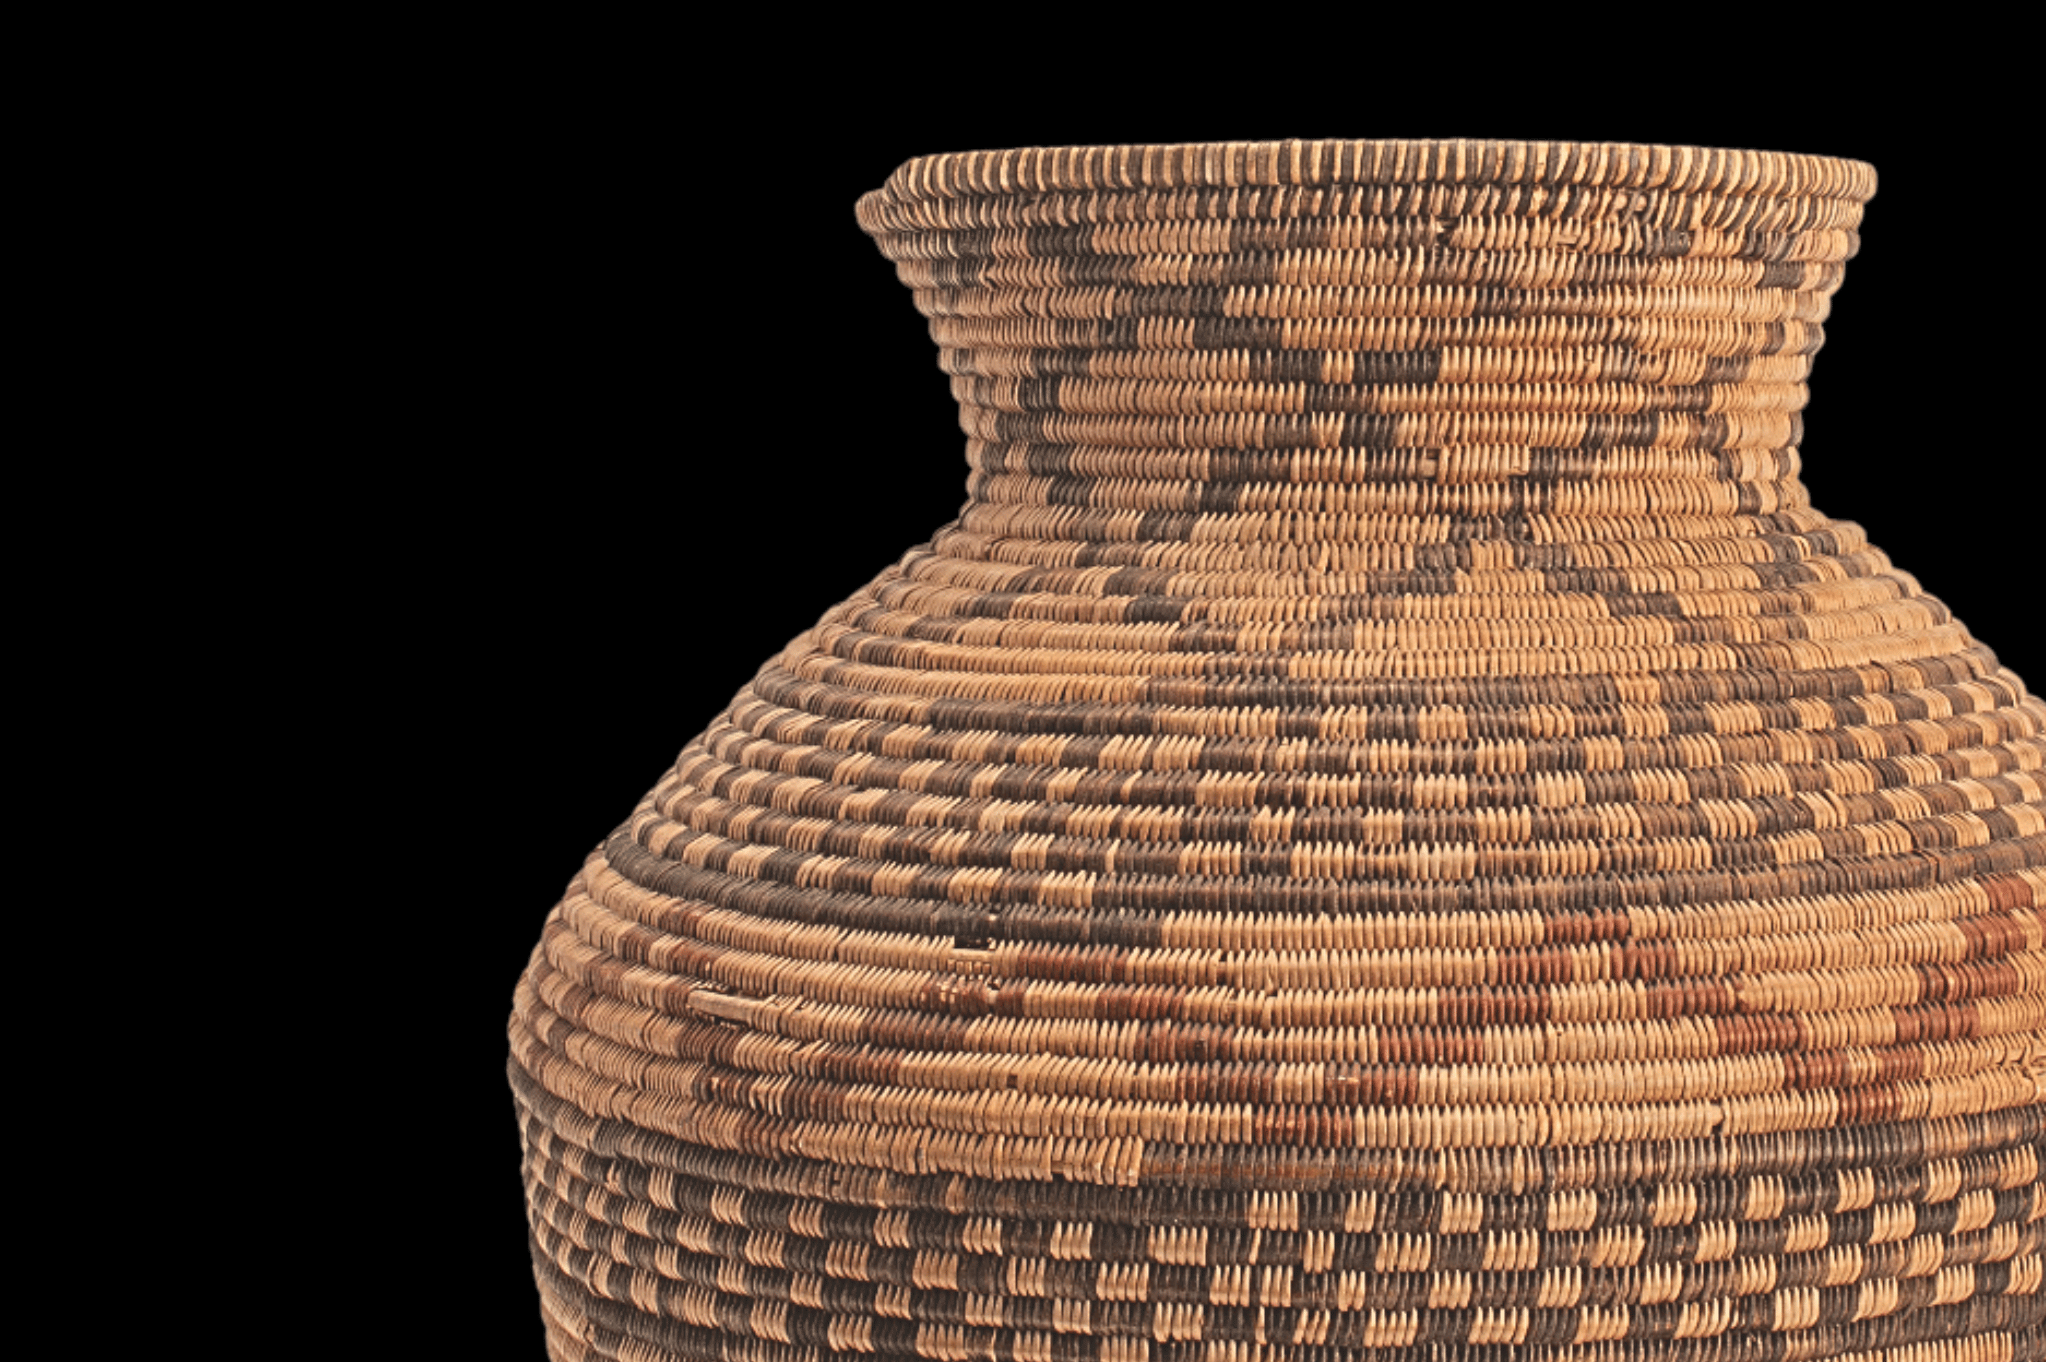 A woven basket on a black background.